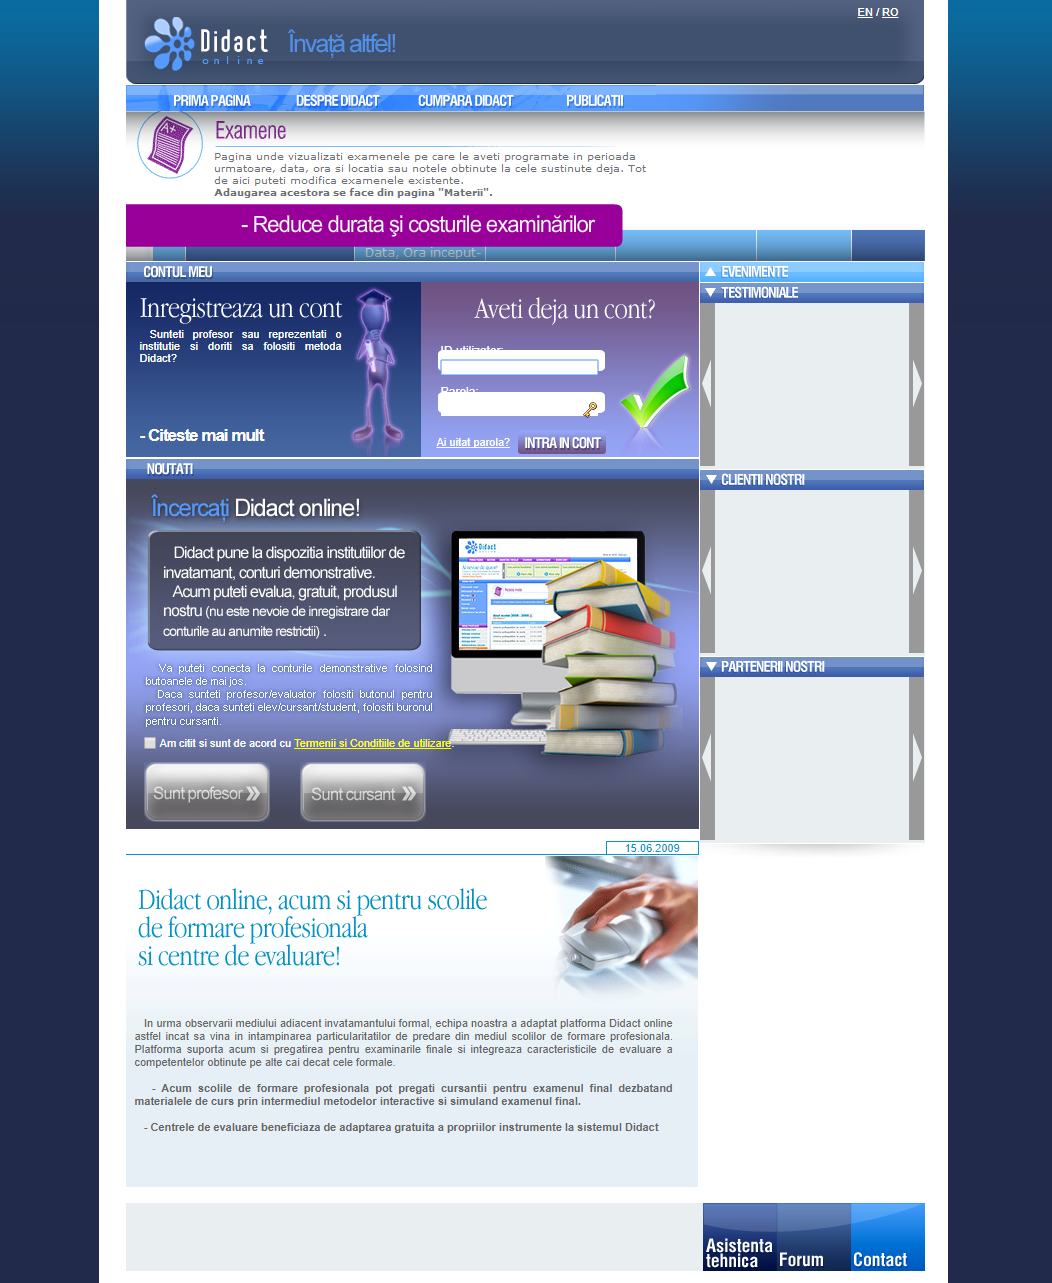 Didactonline - e-Learning & exams